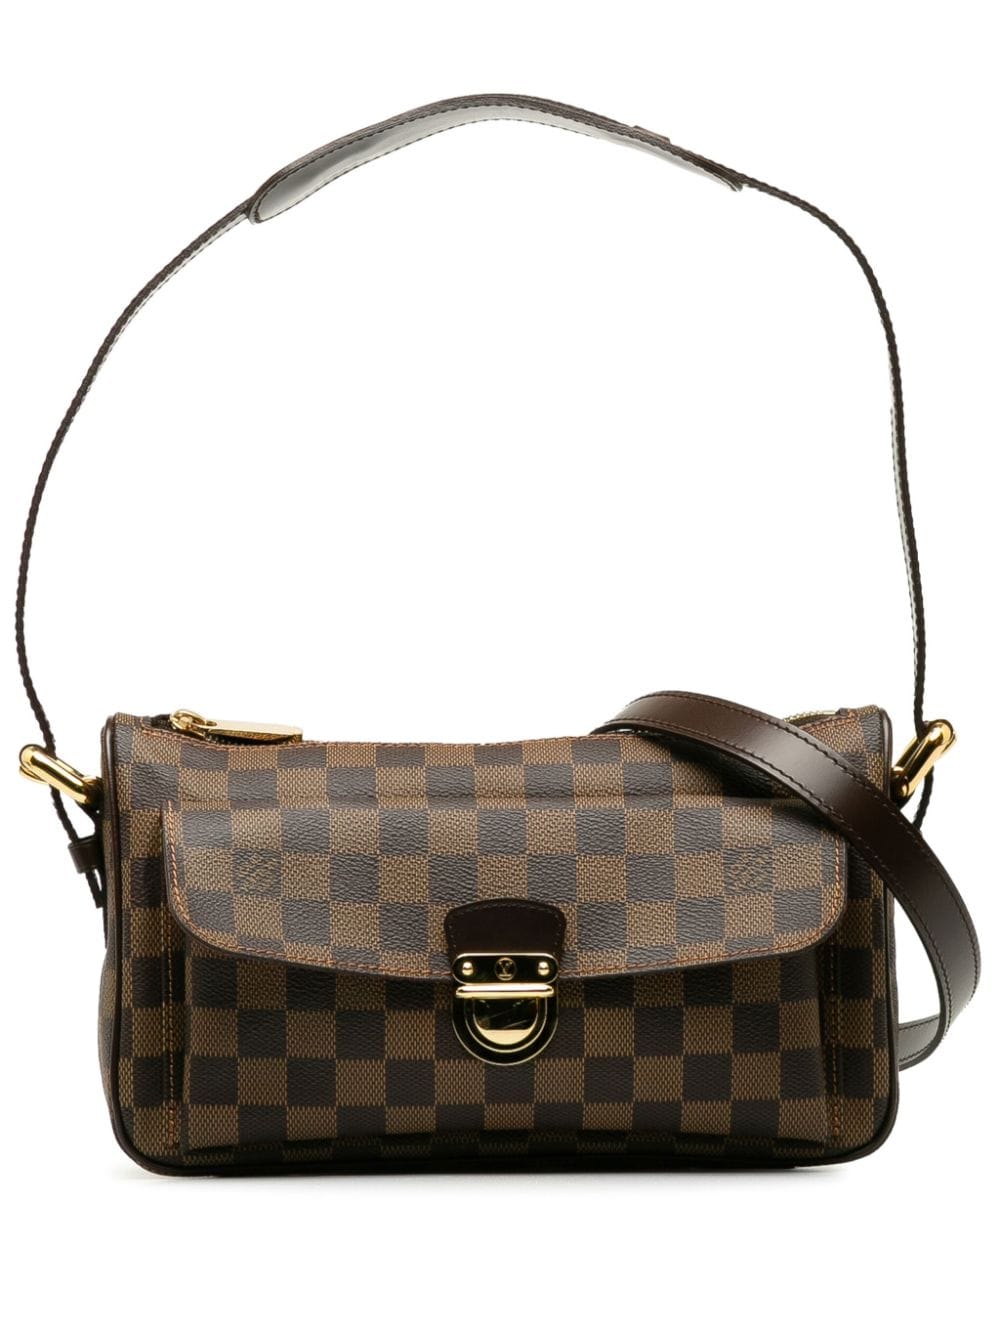 Pre-owned Louis Vuitton 2008 Ravello Gm Two-way Shoulder Bag In 褐色